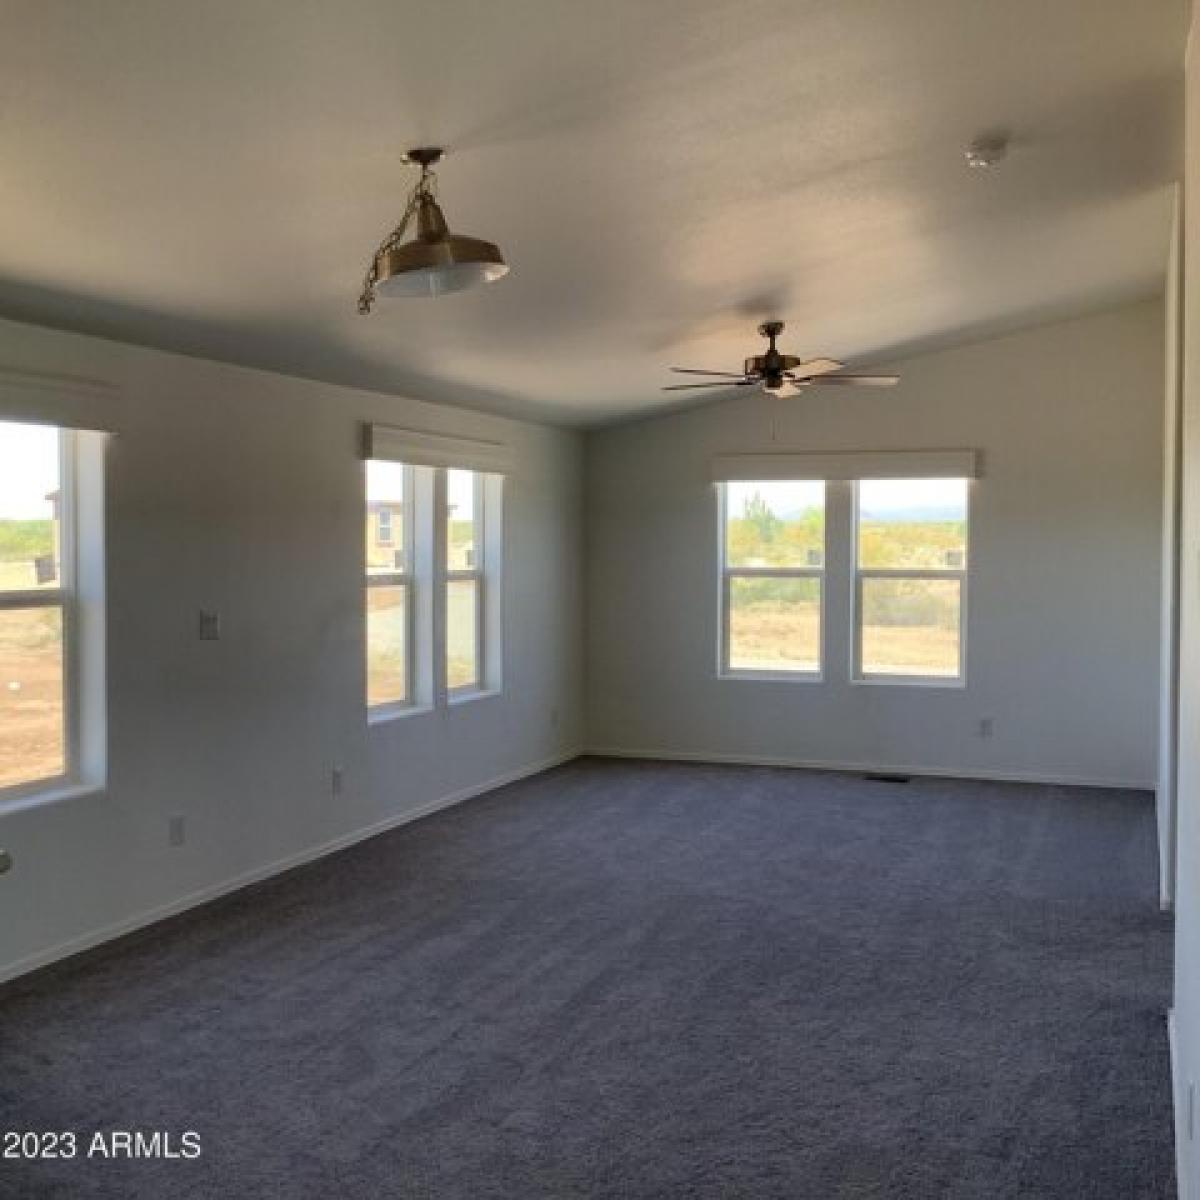 Picture of Home For Sale in Wittmann, Arizona, United States